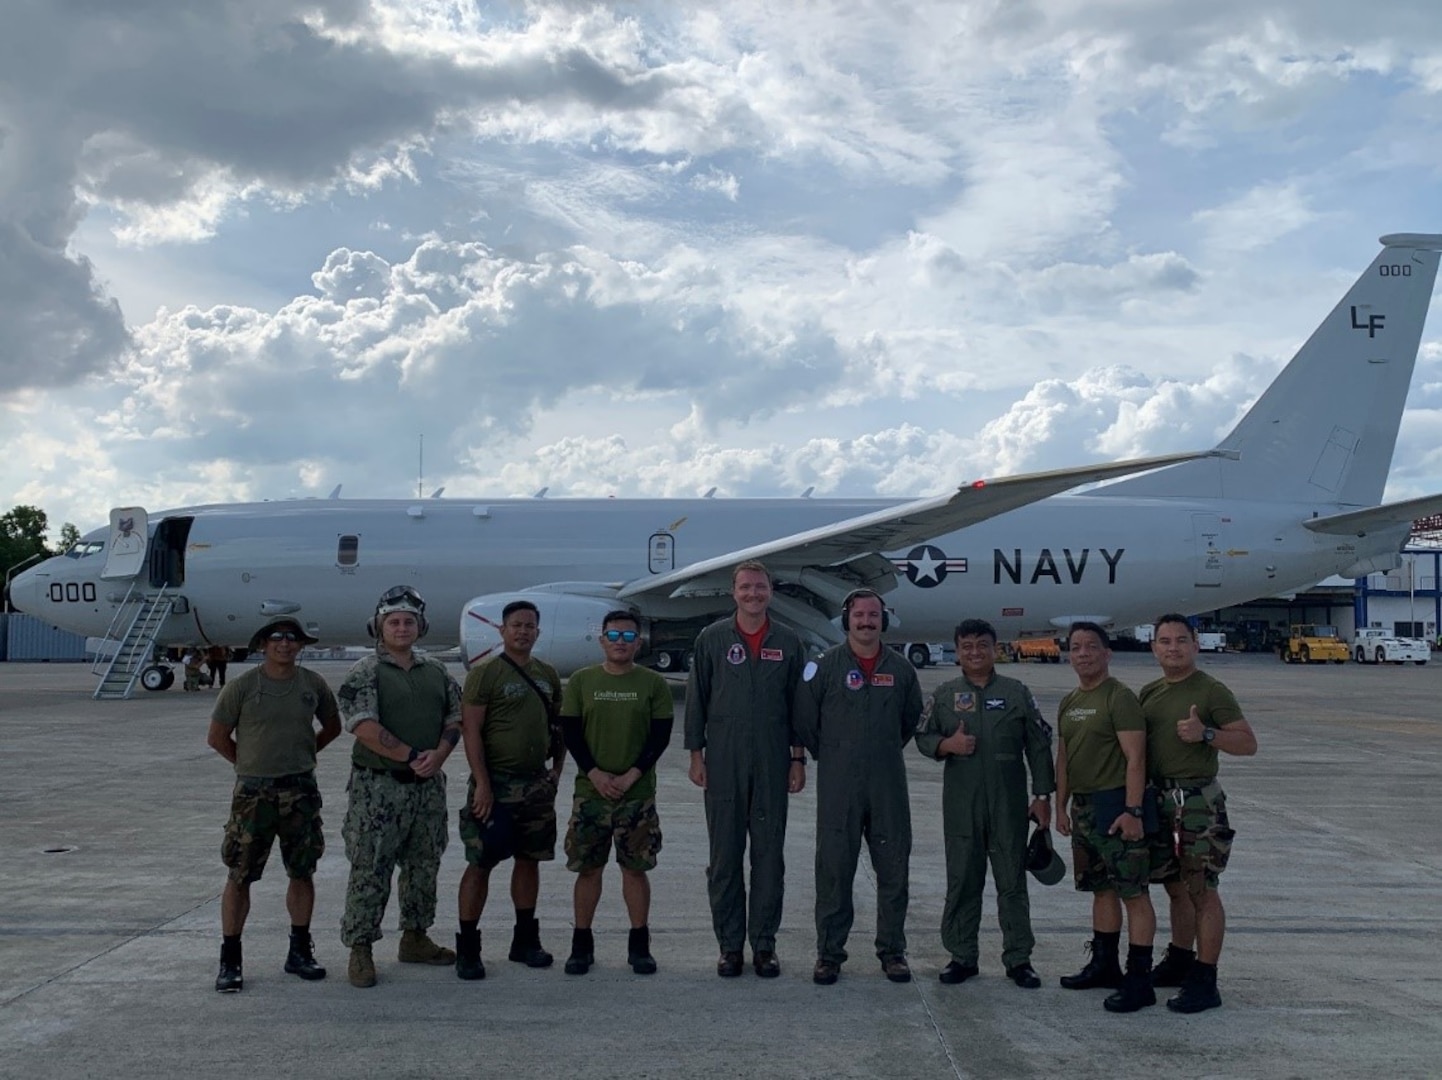 230824-N-XF249-0001 MACTAN, Philippines (Aug. 24, 2023) Crewmembers assigned to the “War Eagles” of Patrol Squadron (VP) 16 and personnel from the Philippine Navy pose in front of a U.S. P-8A during the multilateral exercise SEACAT 23 in Mactan, Aug. 24, 2023. SEACAT 23 is an exercise designed to train U.S. and regional partners for ‘real world, real time’ engagement and enhance their ability to communicate, coordinate and counter non-traditional maritime threats. The VP-16 “War Eagles” are based in Jacksonville, Florida, and are currently forward deployed to Kadena Air Base, Japan. The squadron conducts maritime patrol and reconnaissance as part of a rotational deployment to the U.S. 7th Fleet area of operations. (U.S. Navy photo by Chief Aviation Electrician’s Mate Jason King)